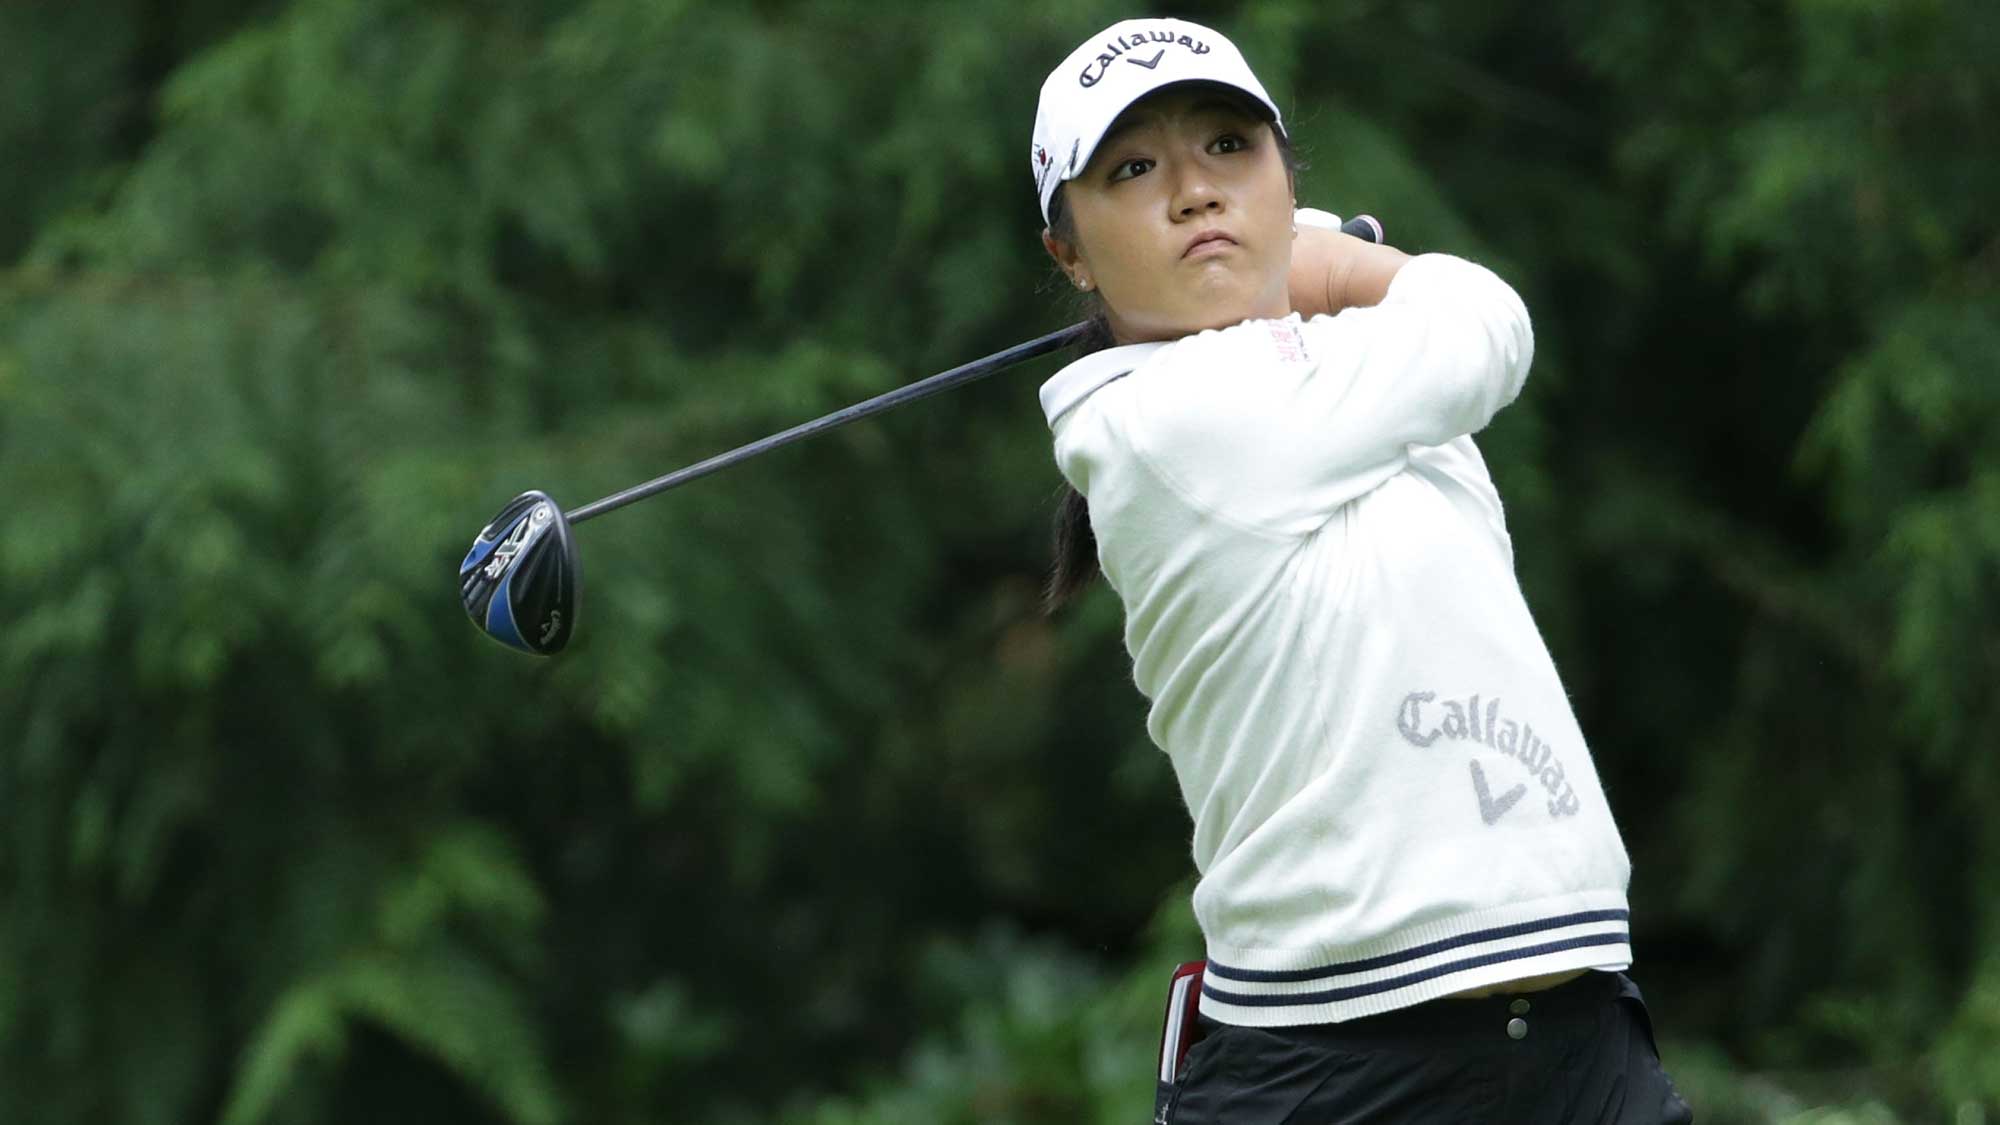 Lydia Ko of New Zealand hits a tee shot on the fourth hole during the third round of the KPMG Women's PGA Championship